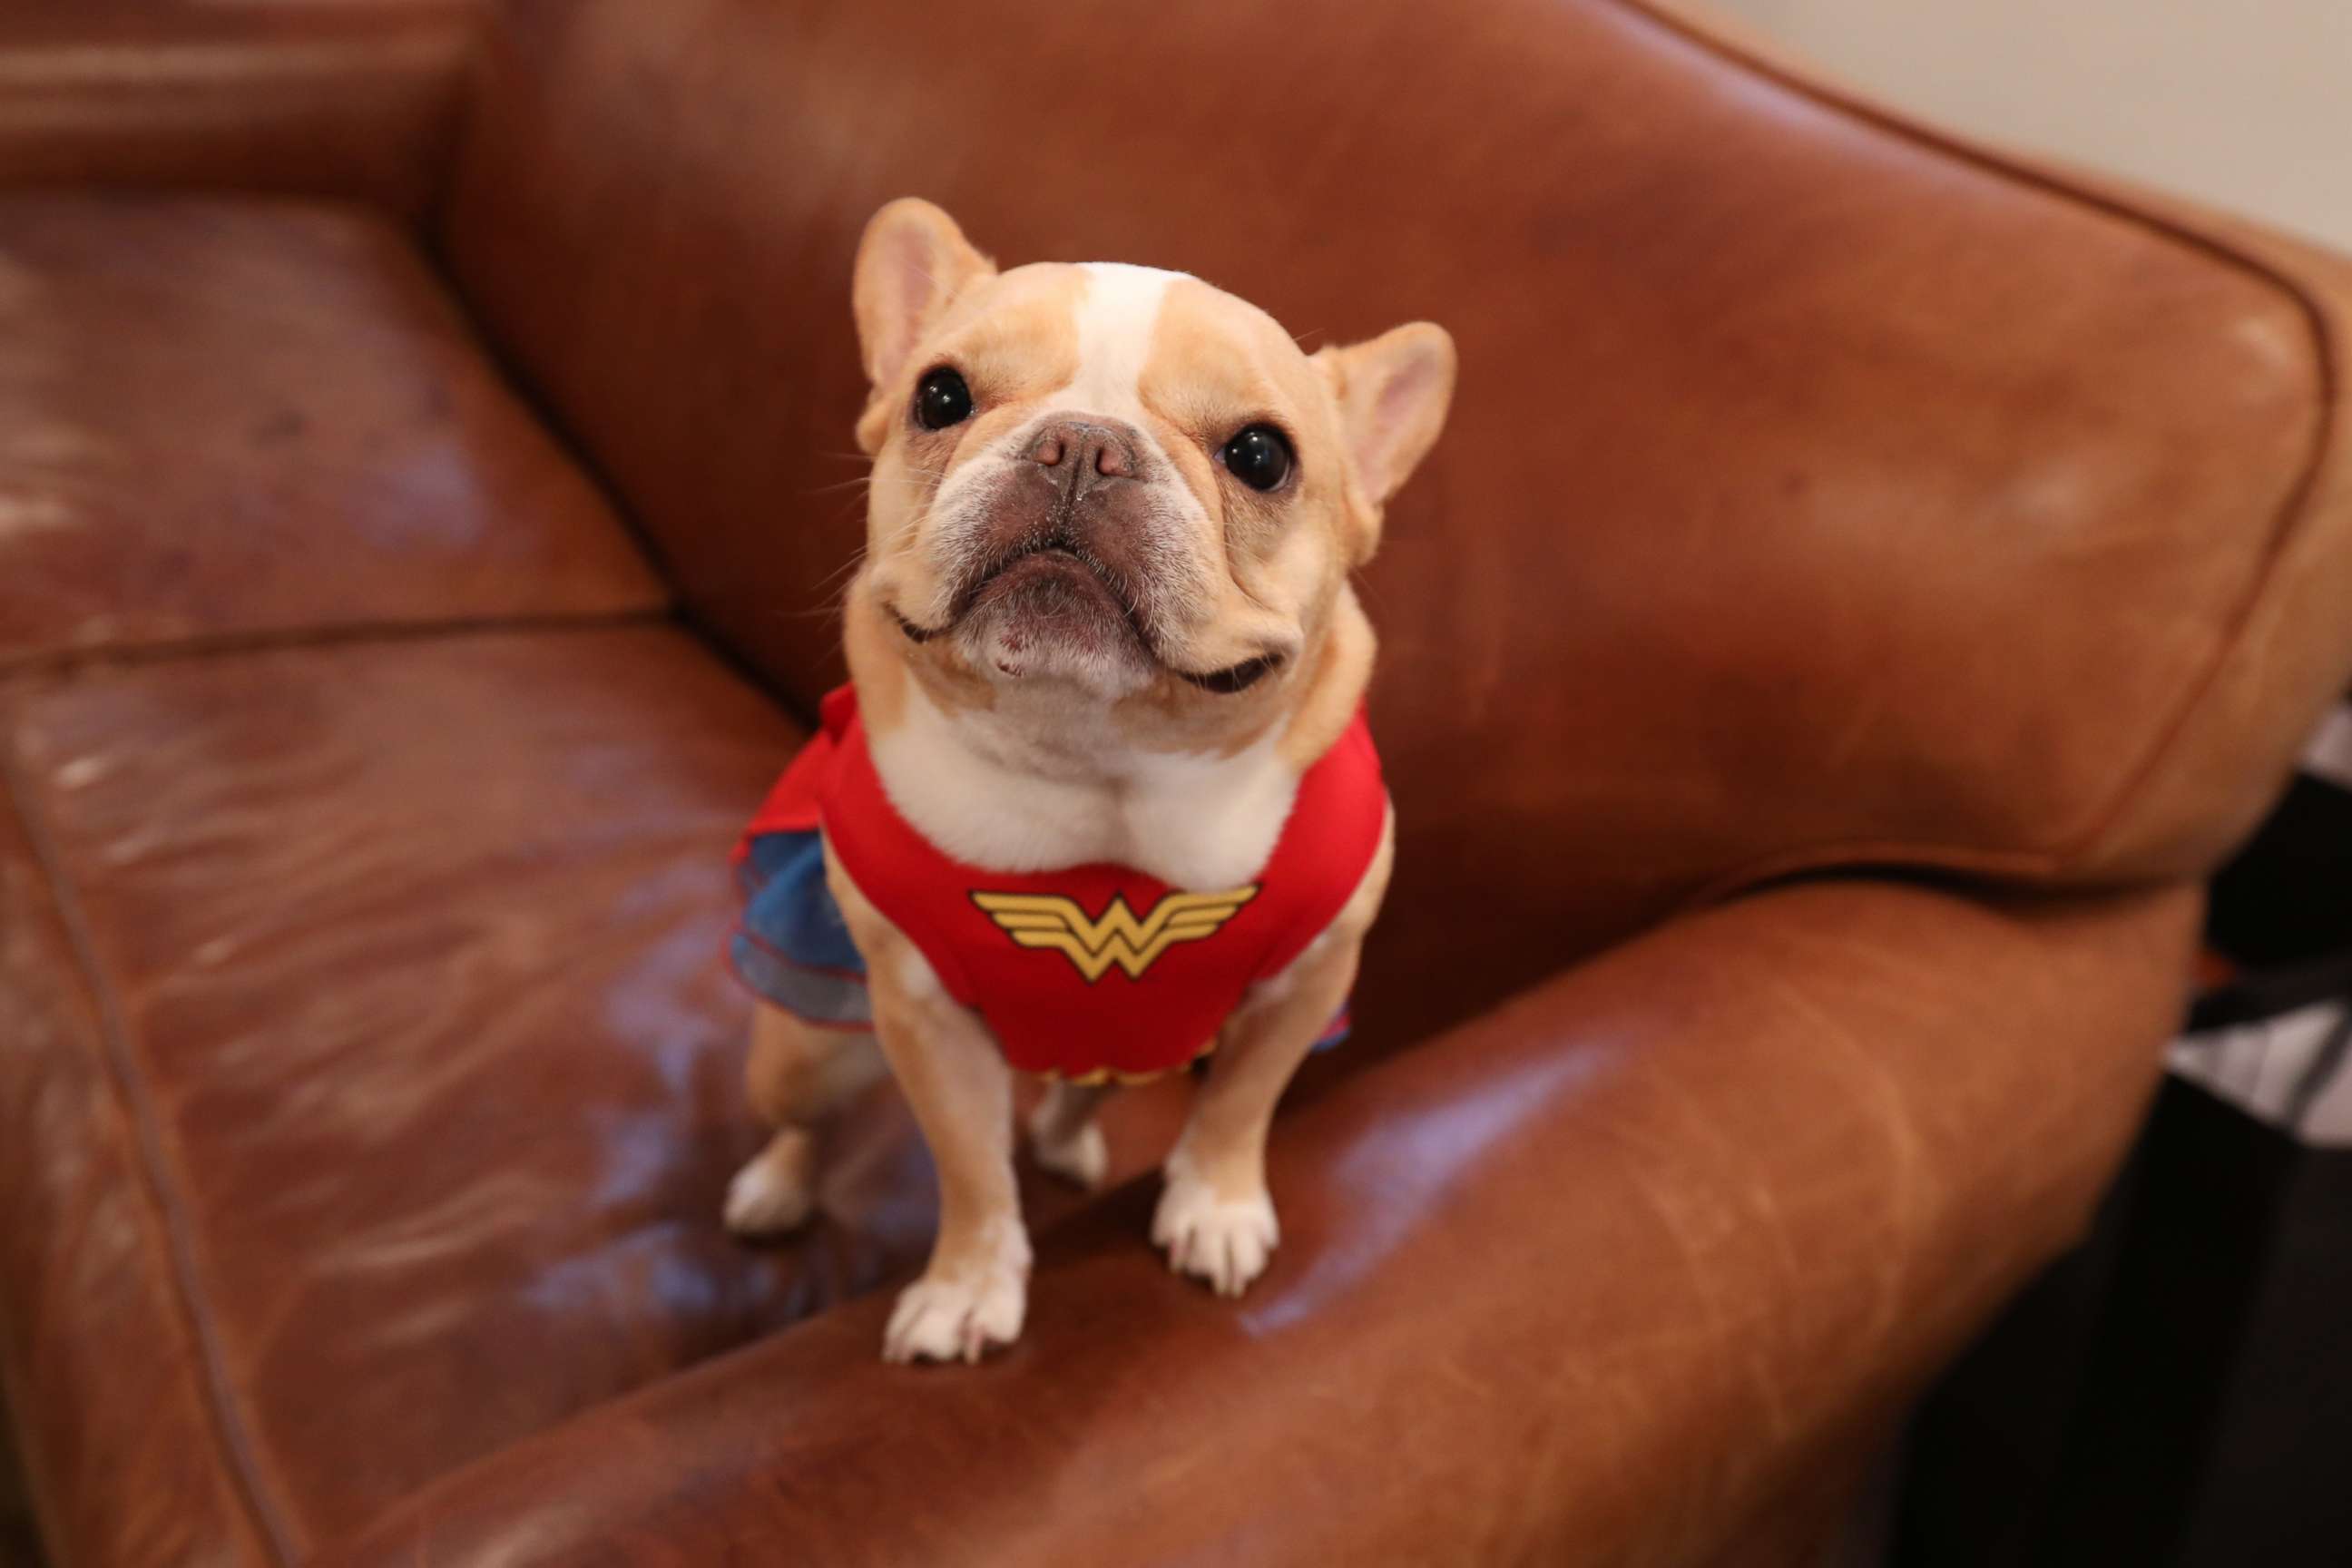 PHOTO: A French Bulldog dresses up as the Super Hero Wonder Woman during a PetSmart event for Halloween. 